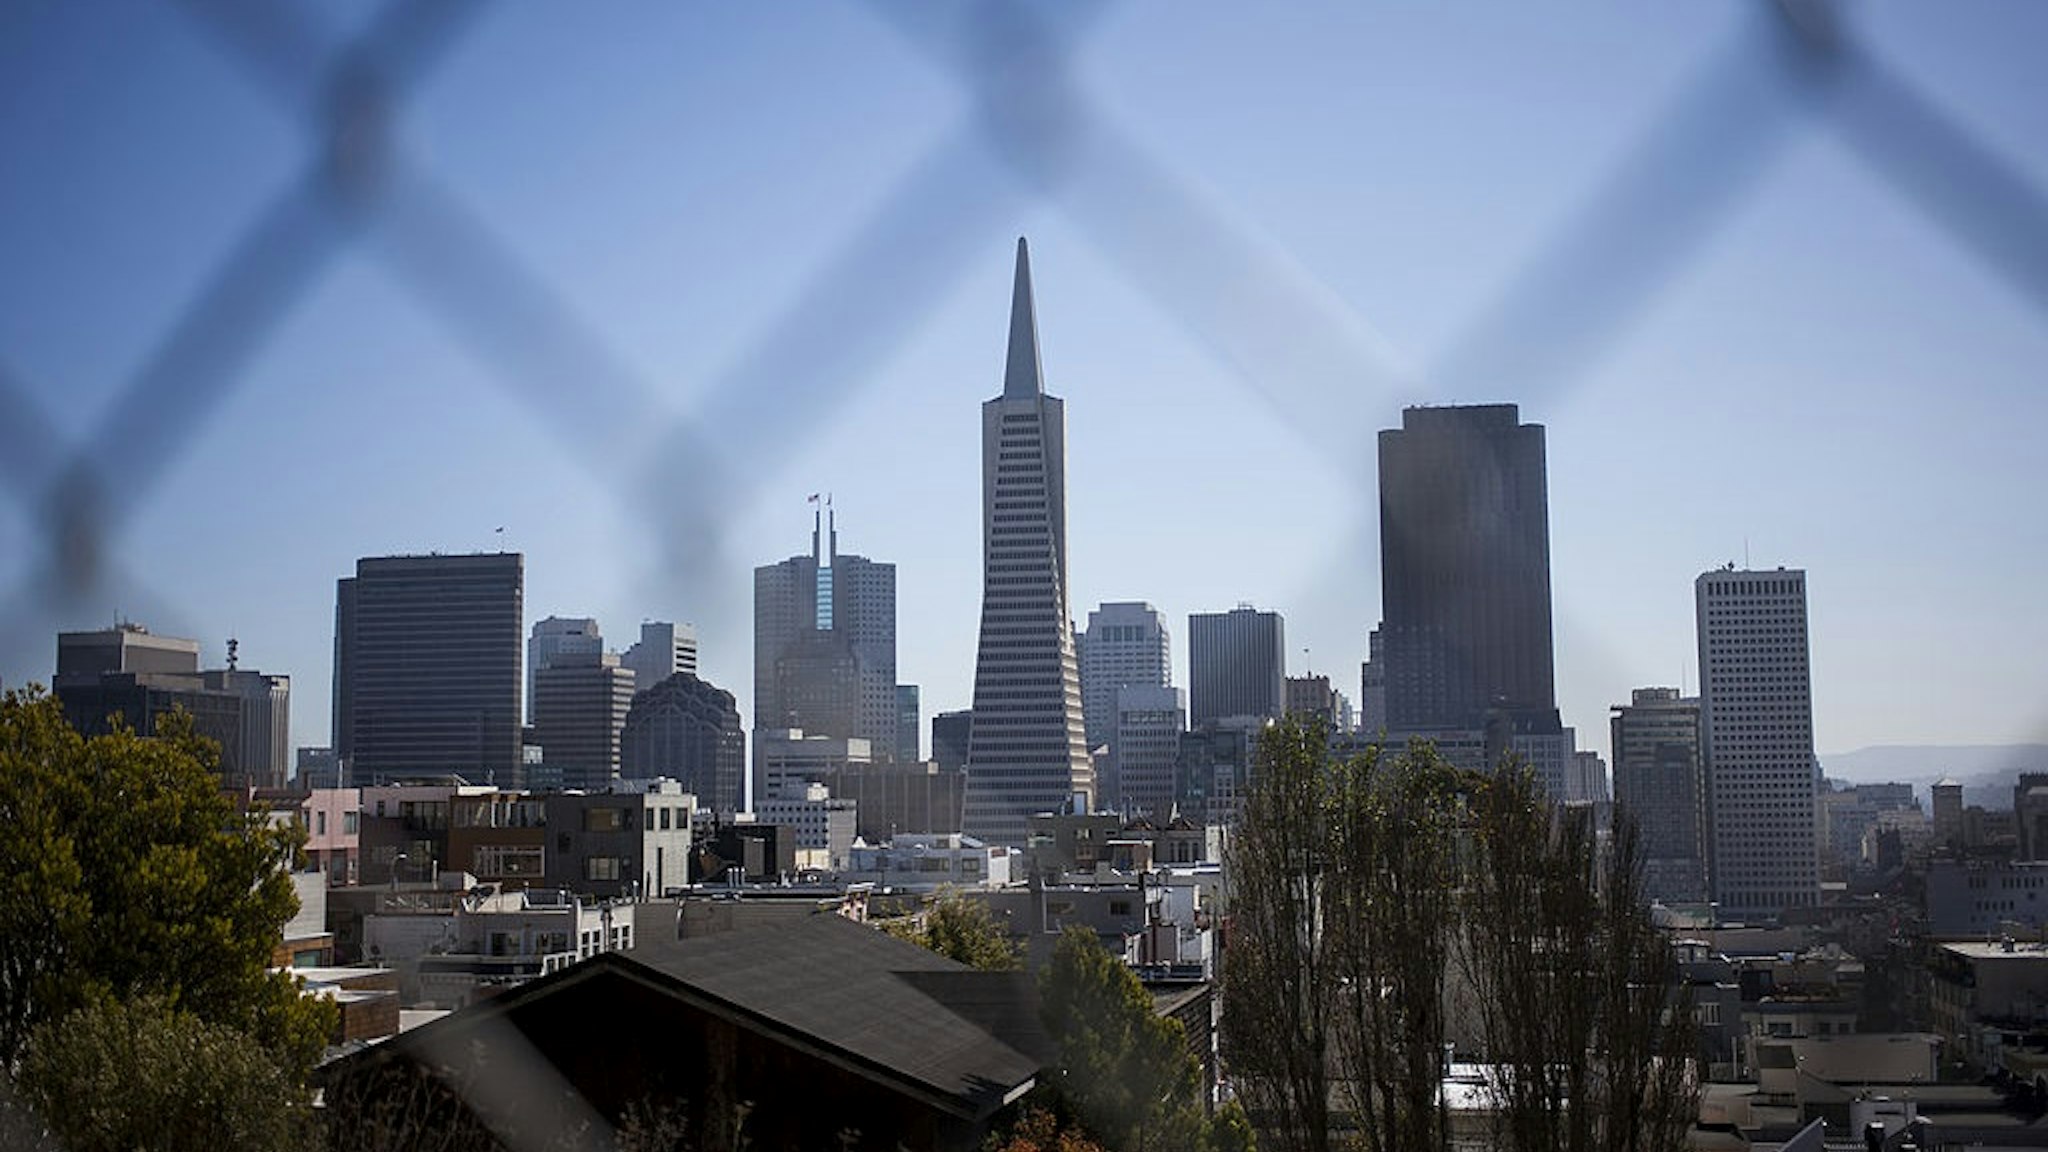 SAN FRANCISCO, CA - OCTOBER 11: The skyline of San Francisco is seen behind a fence on October 11, 2013 in San Francisco, United States.